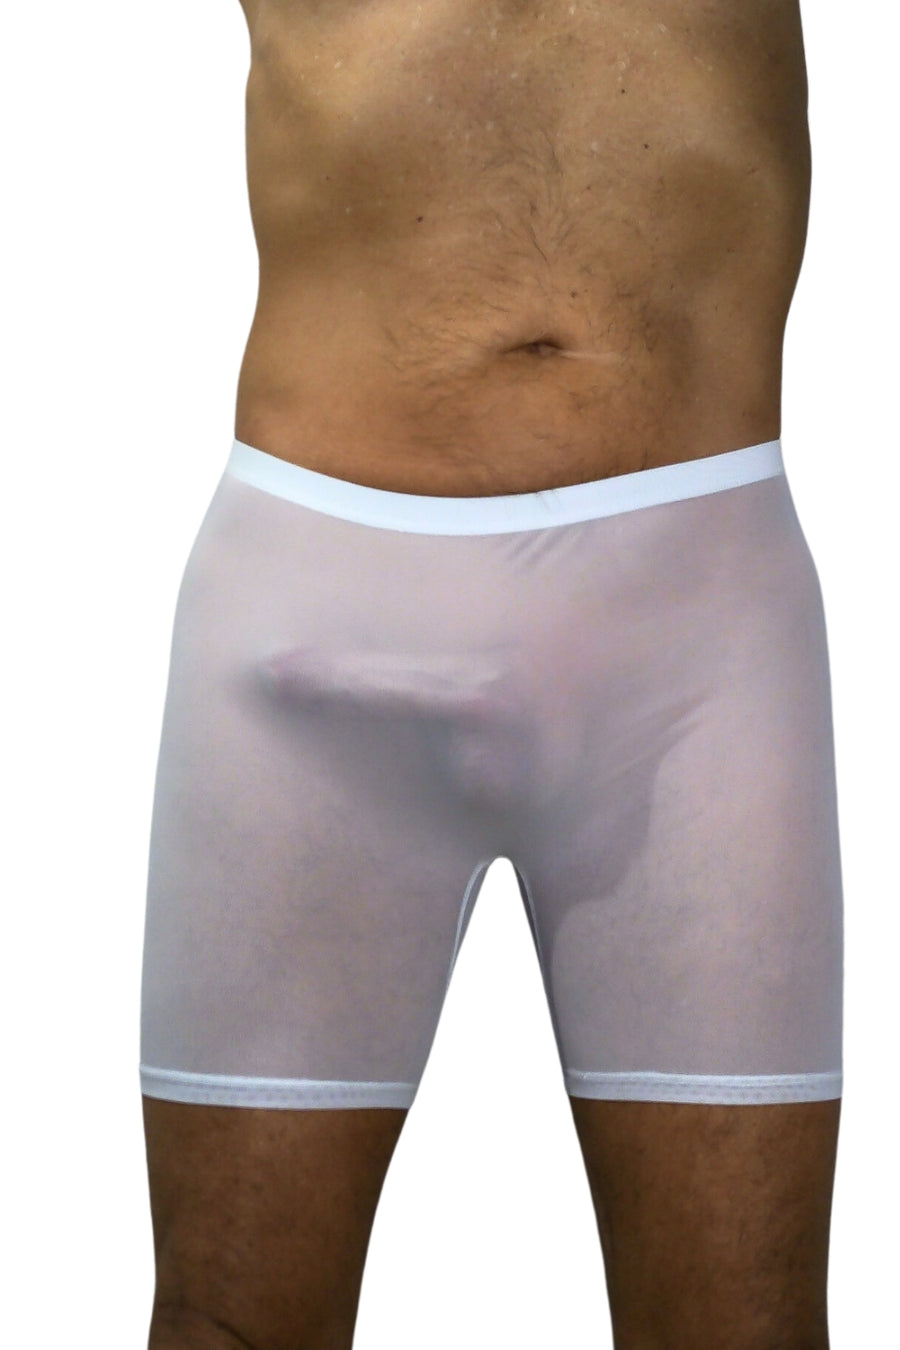 Bodywear for Men Ultra Sheer High Waist Boxer Shorts #BfM-1042 made from a fine poly blend sheer material. Our Sheer Boxer shorts sit high on your waist, 4' long legs, seamless front with a center seamed rear in White